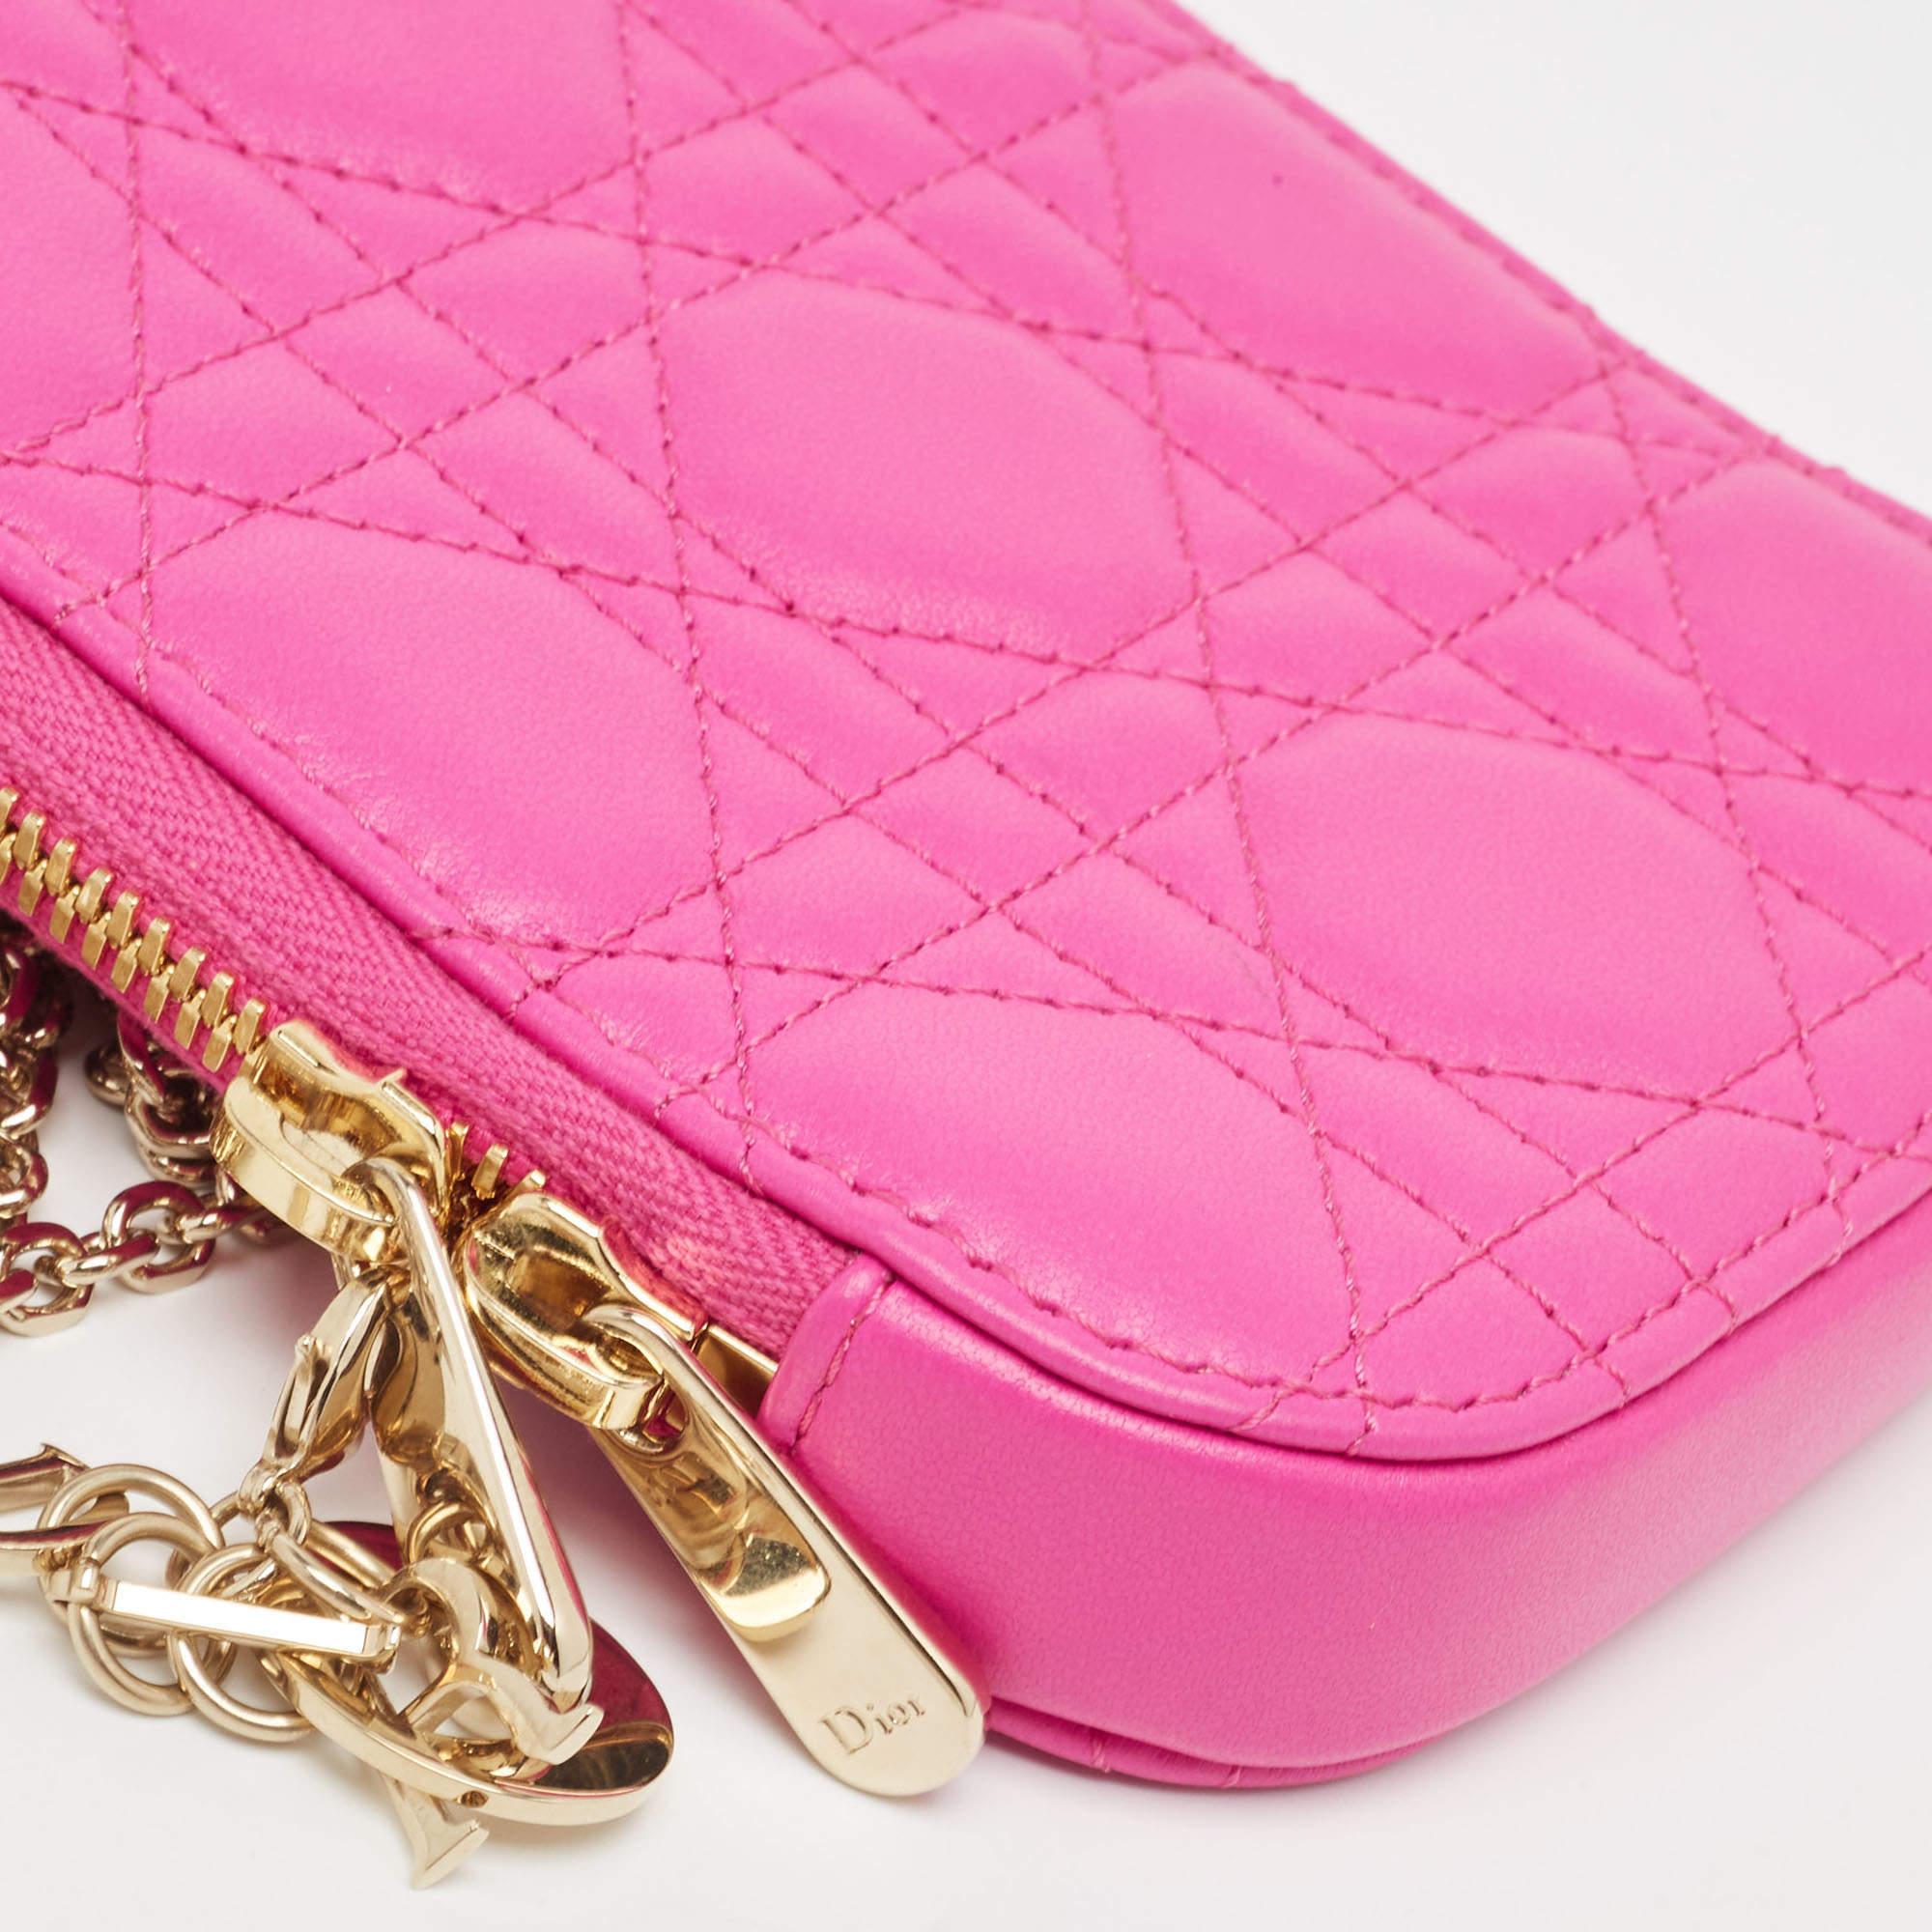 Dior Pink Cannage Leather Lady Dior Phone Chain Holder In Excellent Condition For Sale In Dubai, Al Qouz 2